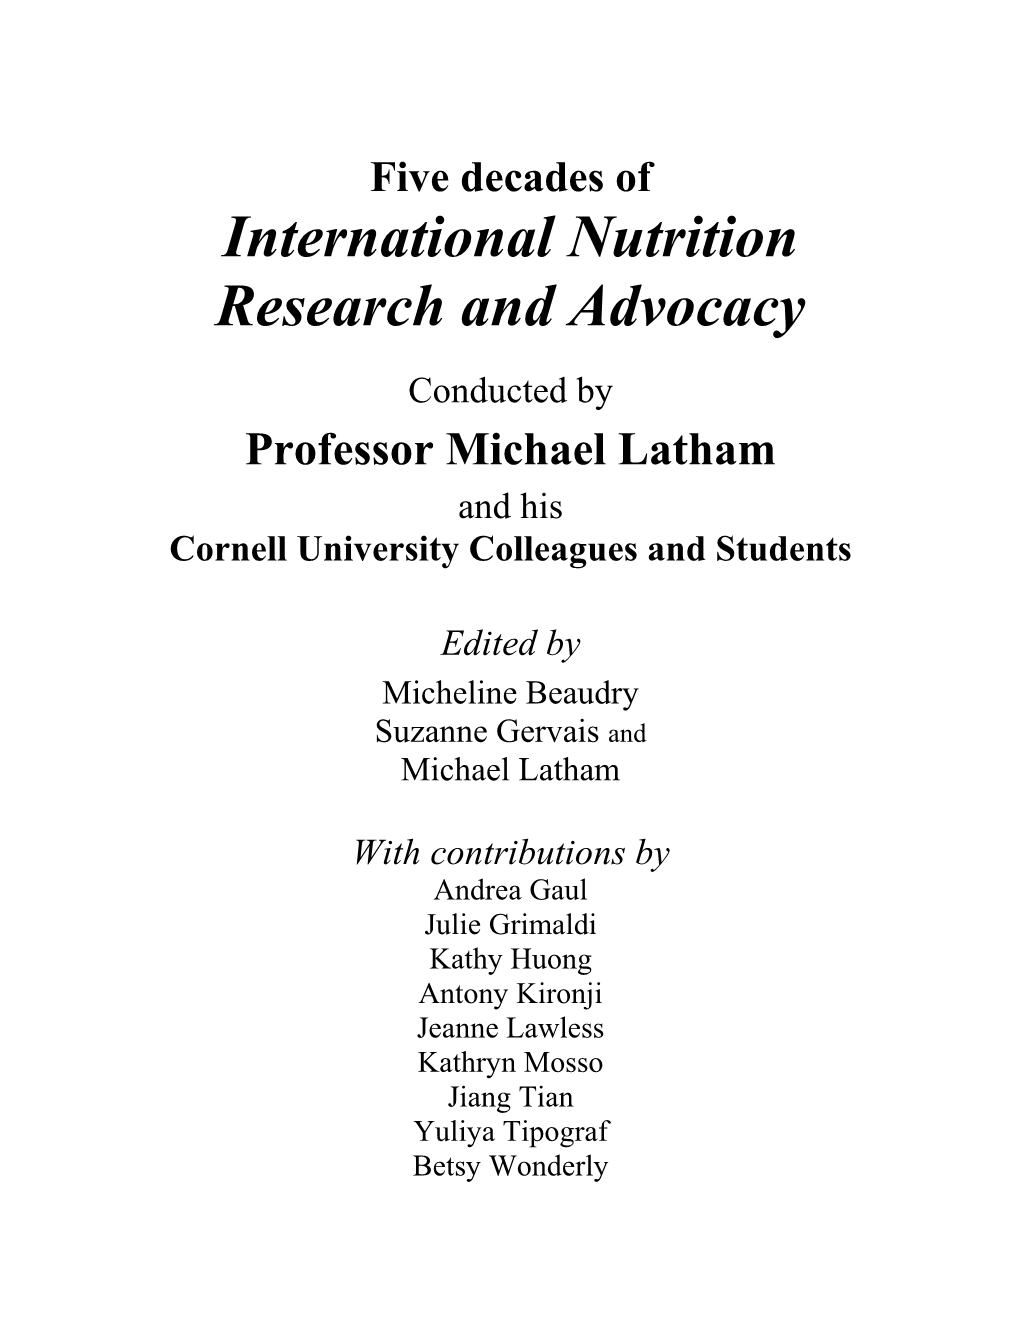 Five Decades of International Nutrition Research and Advocacy Conducted by Professor Michael Latham and His Cornell University Colleagues and Students